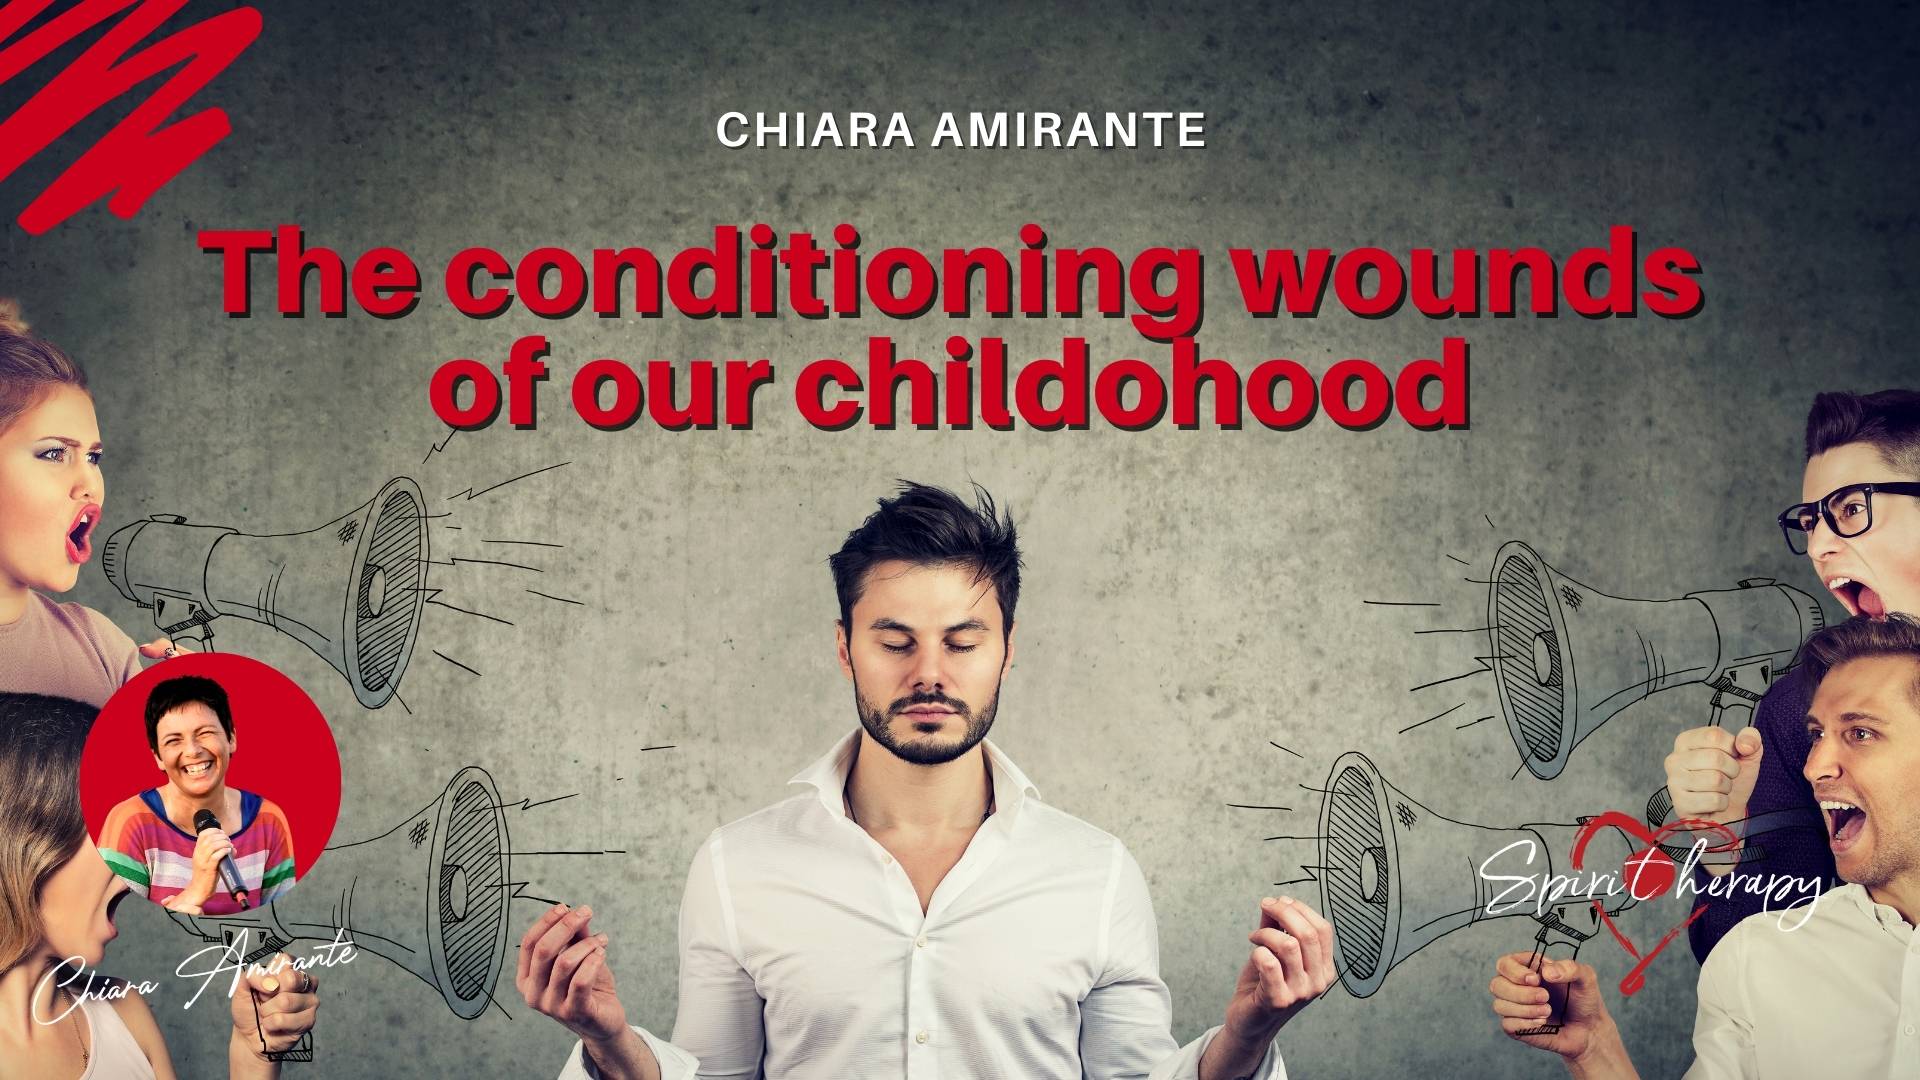 The conditioning wounds of our childhood - Chiara Amirante